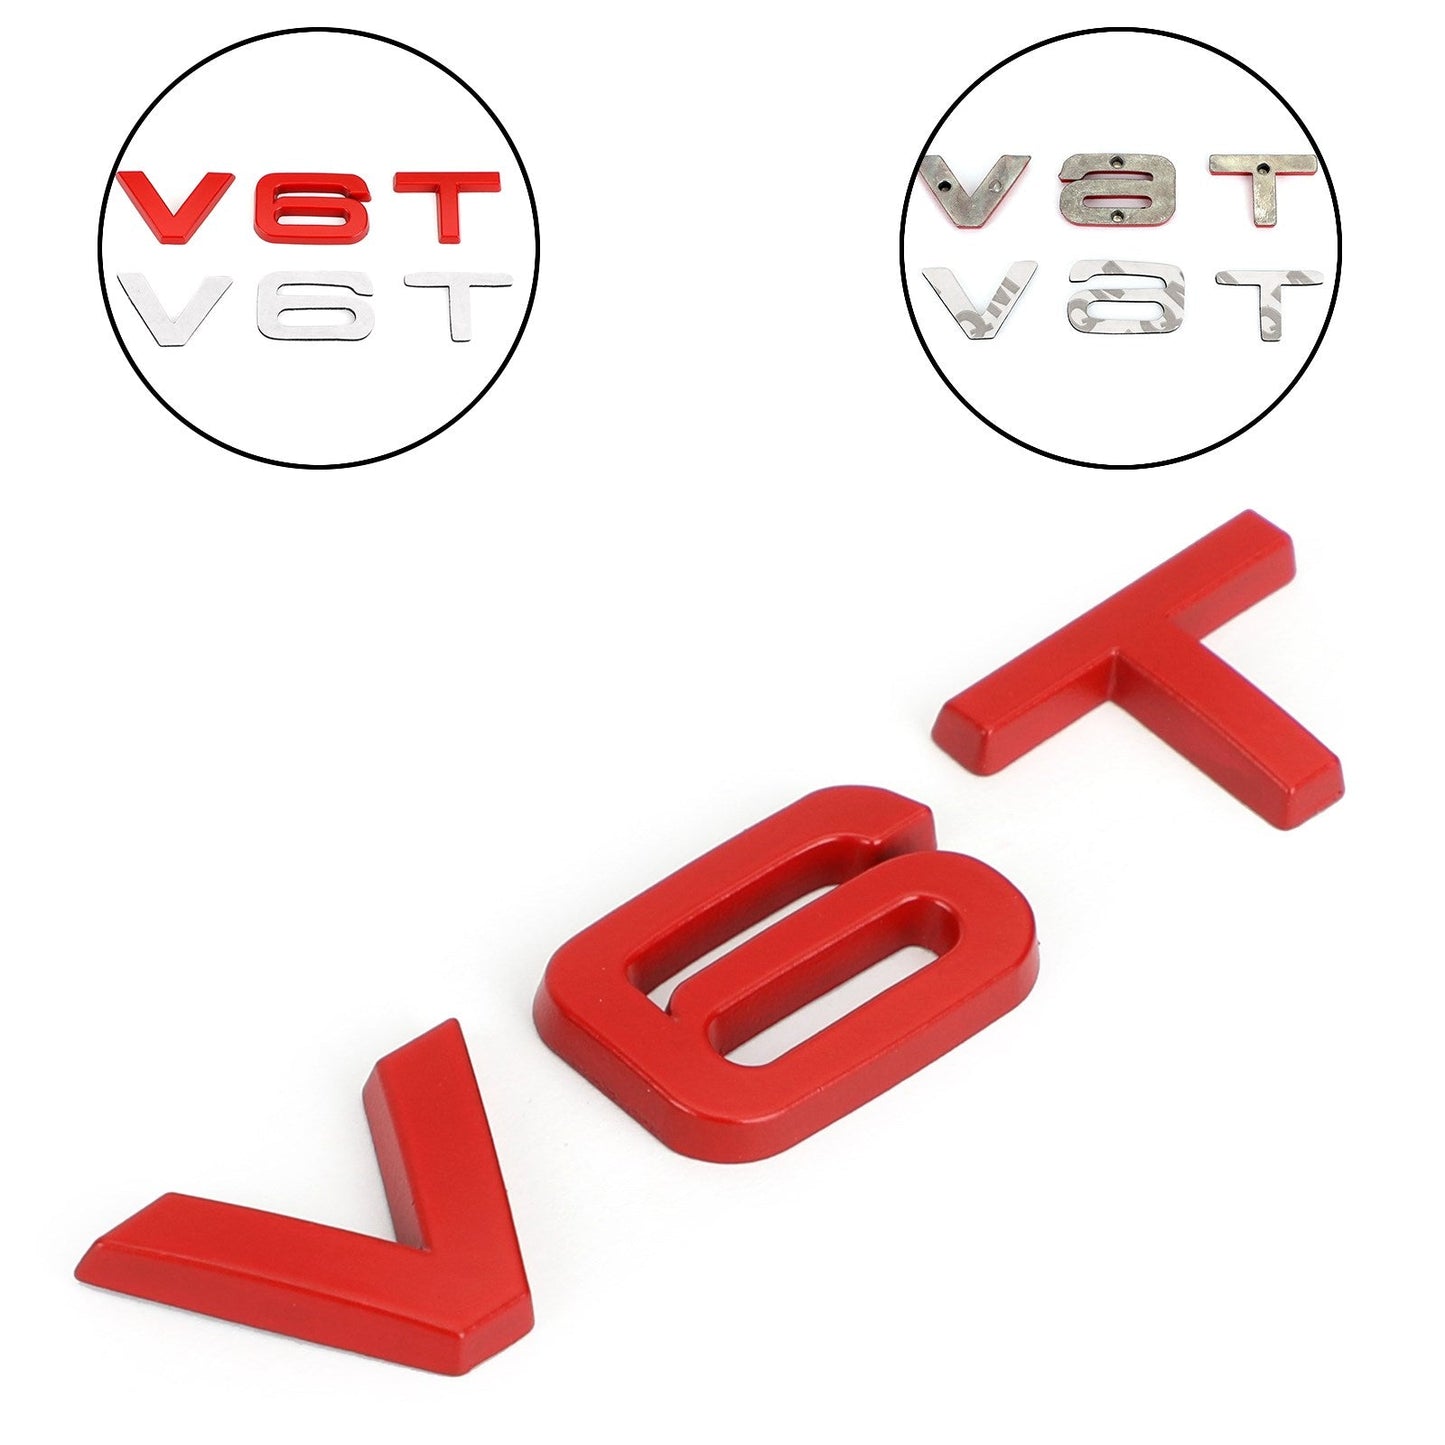 V6T Emblem Badge Fit For AUDI A1 A3 A4 A5 A6 A7 Q3 Q5 Q7 S6 S7 S8 S4 SQ5 Red